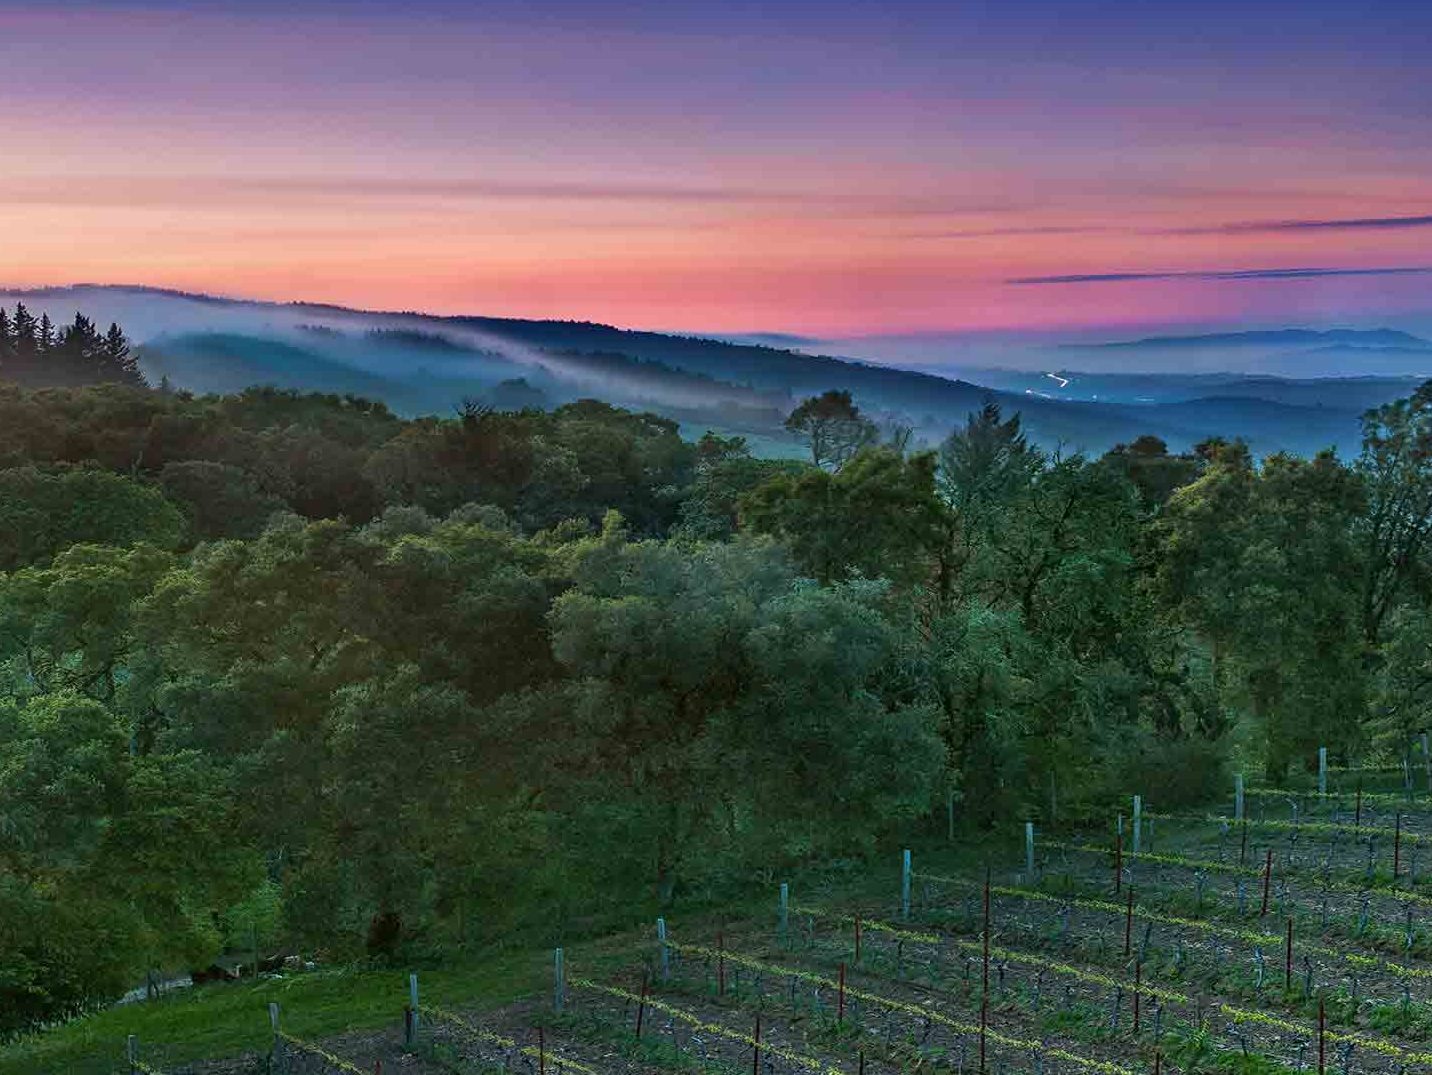 pink and purple skies shine on to green trees and vineyard